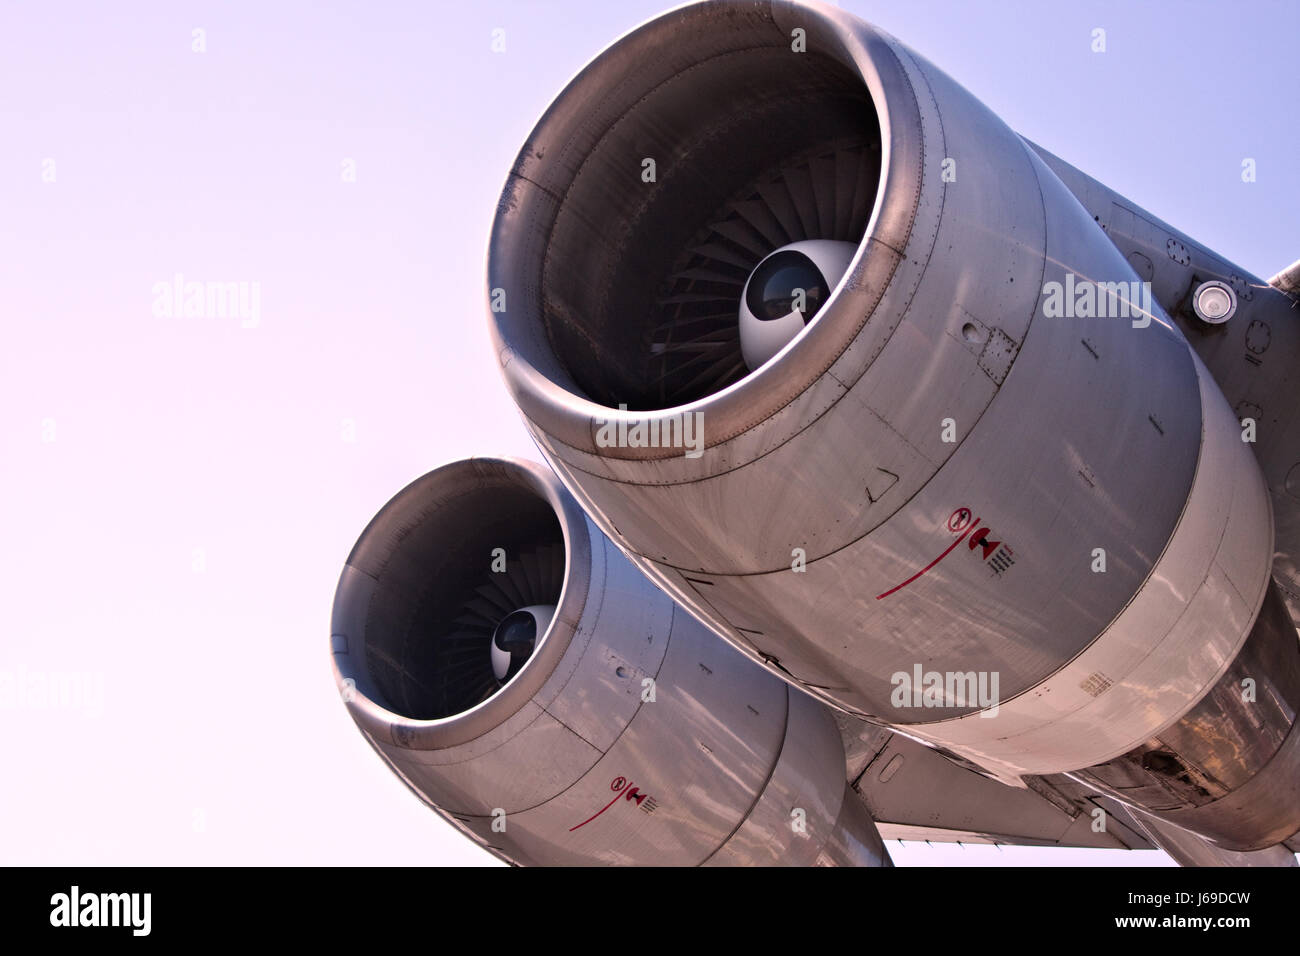 detail view of a jet plane engine Stock Photo